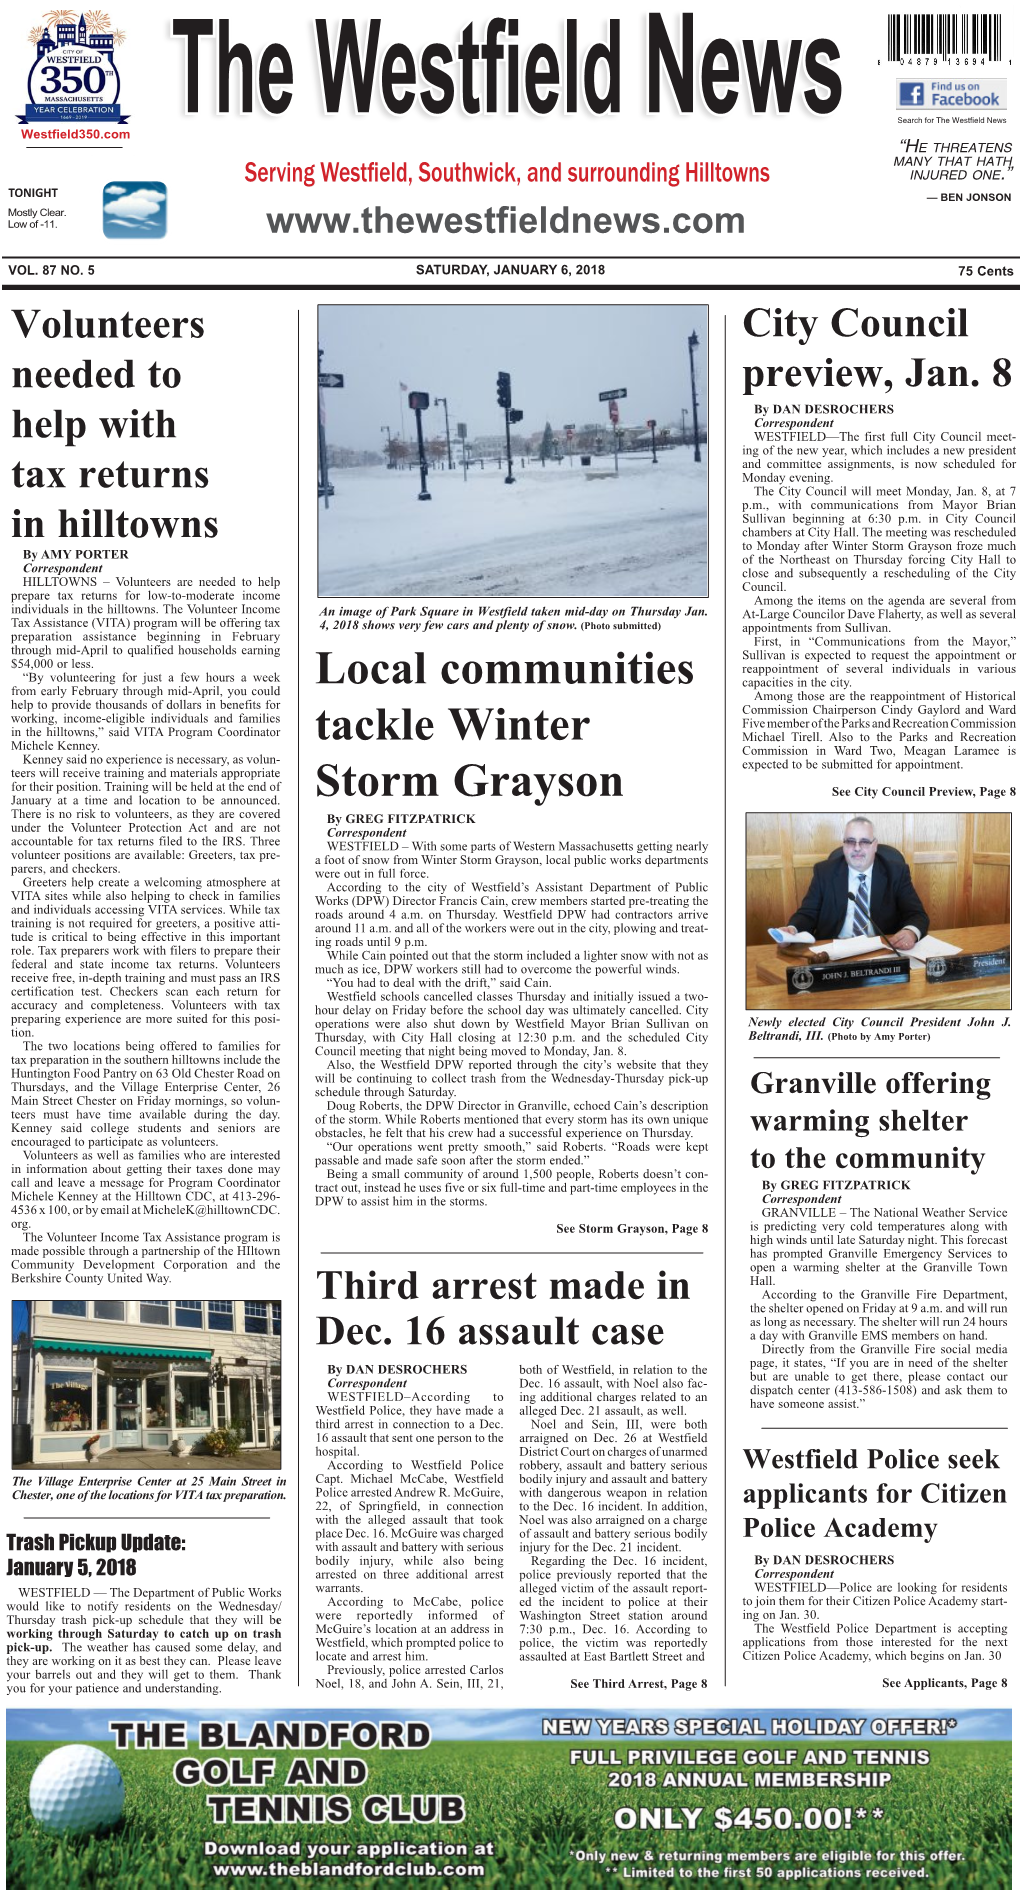 Local Communities Tackle Winter Storm Grayson